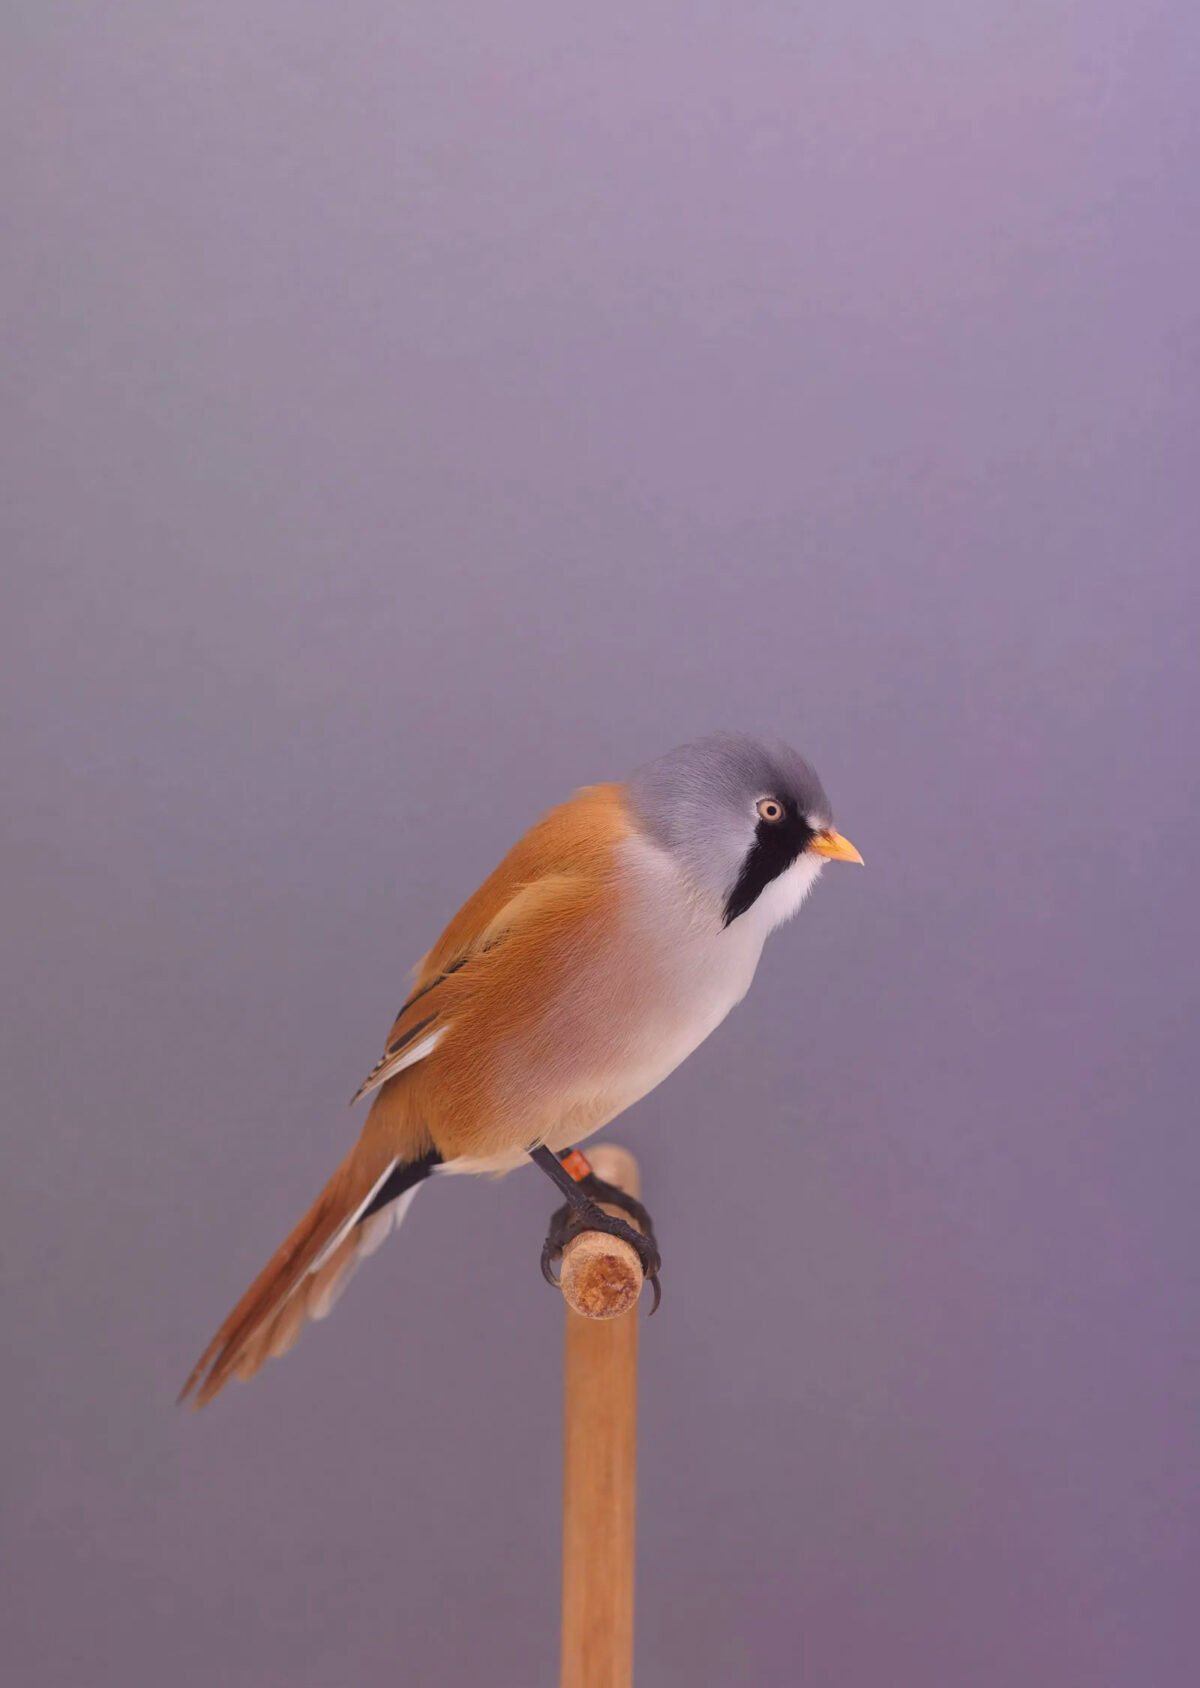 An Incomplete Dictionary Of Show Birds A Minimalist Bird Photography Series By Luke Stephenson (4)